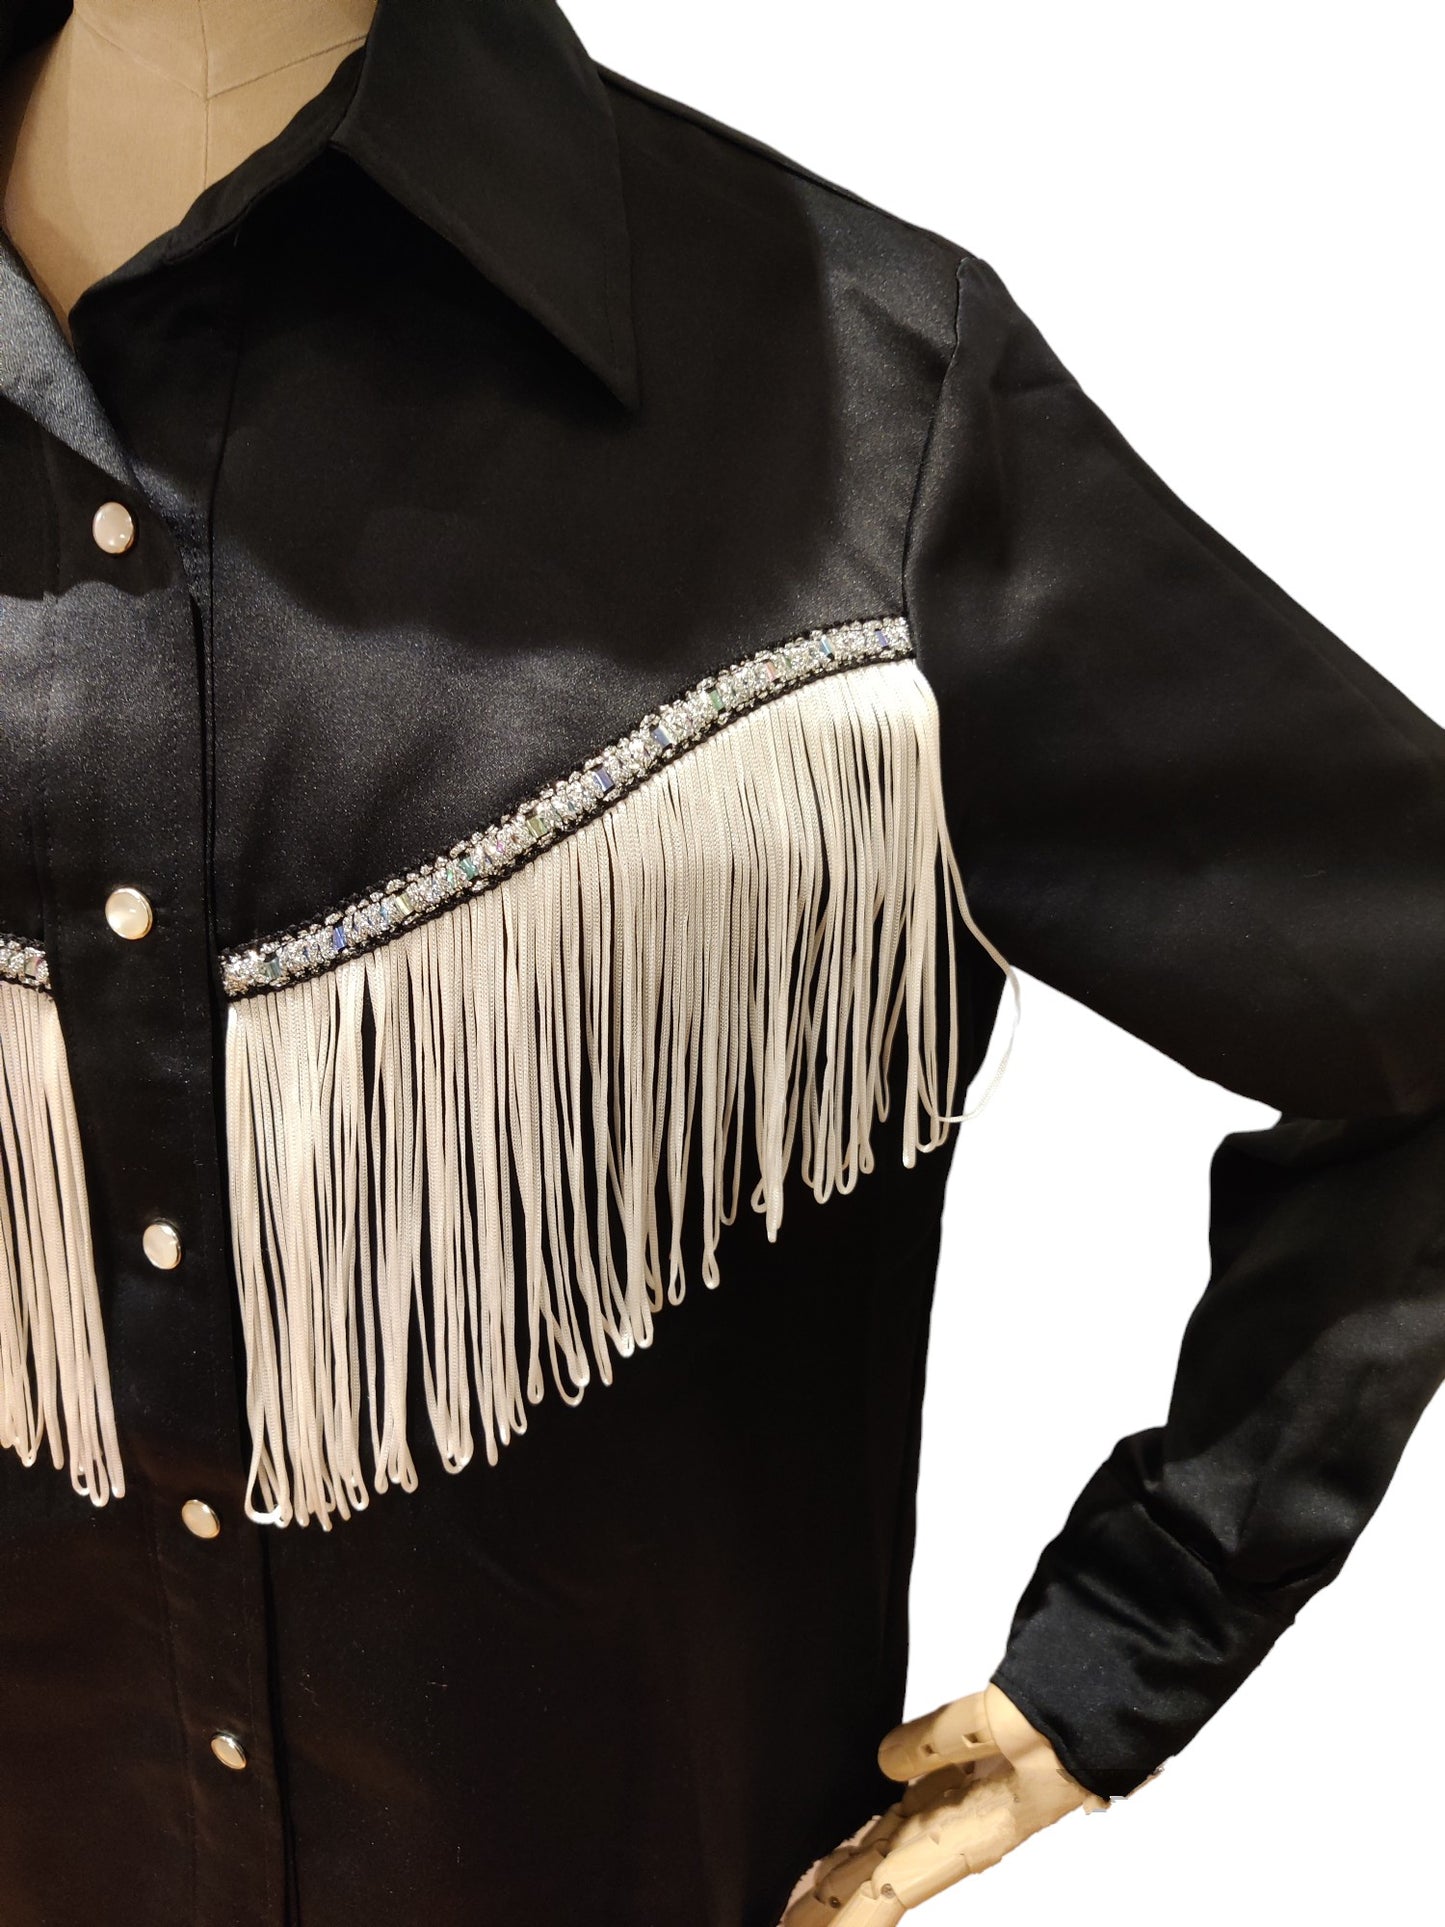 Fabulous vintage rodeo shirt in black with white tassels. Size 14.